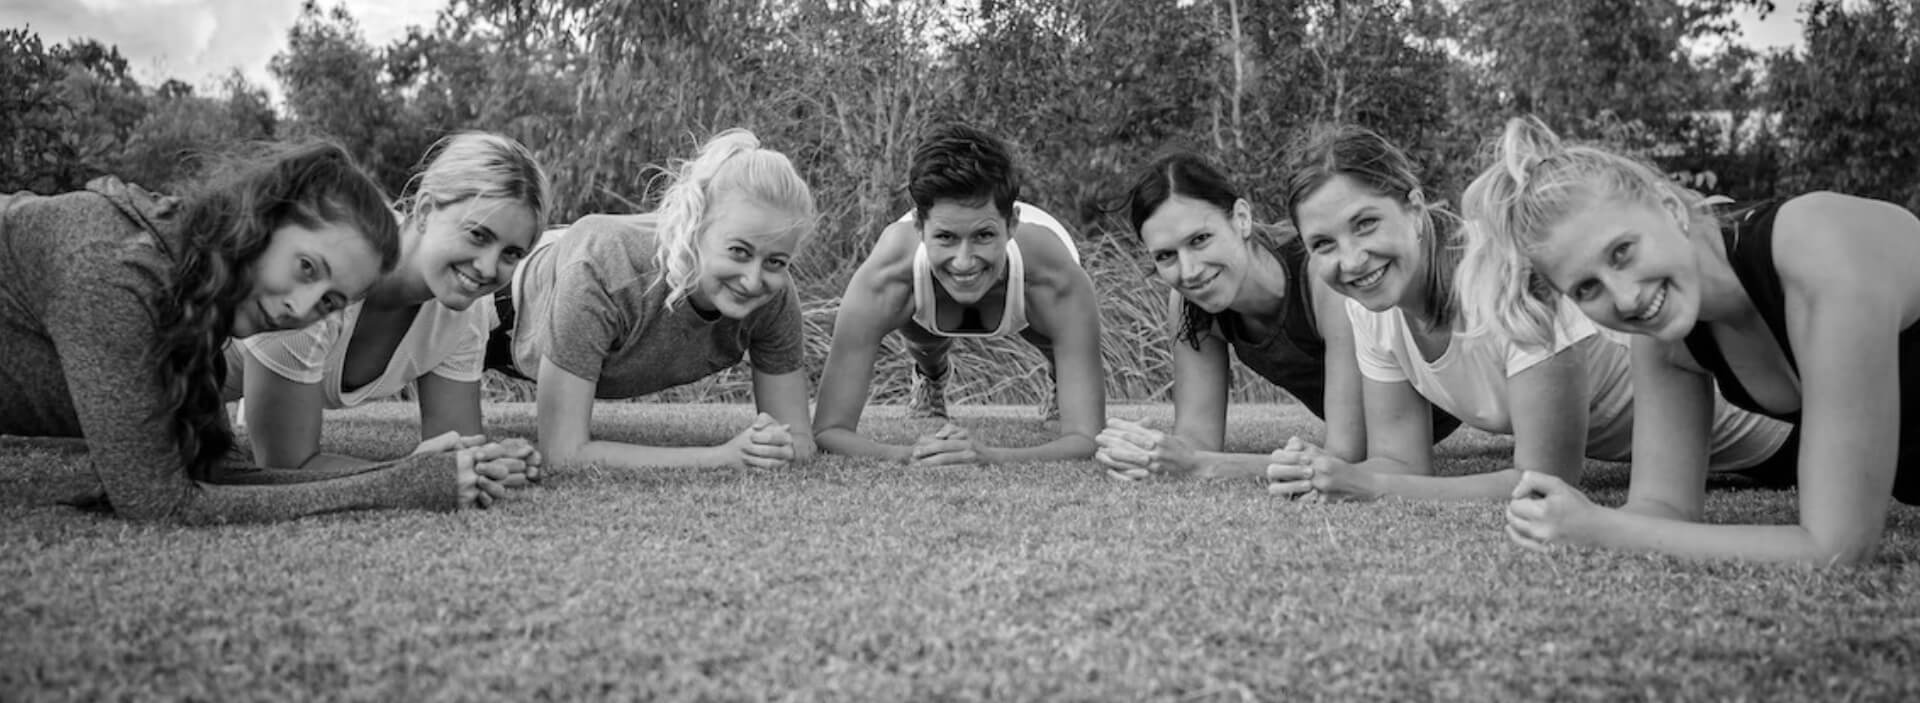  Abingdon Co. image displays a diverse group of individual woman all in a pushup position besides another in a line Smiling and looking straight at the camera in a forest setting while on the grass this picture is in black and white.